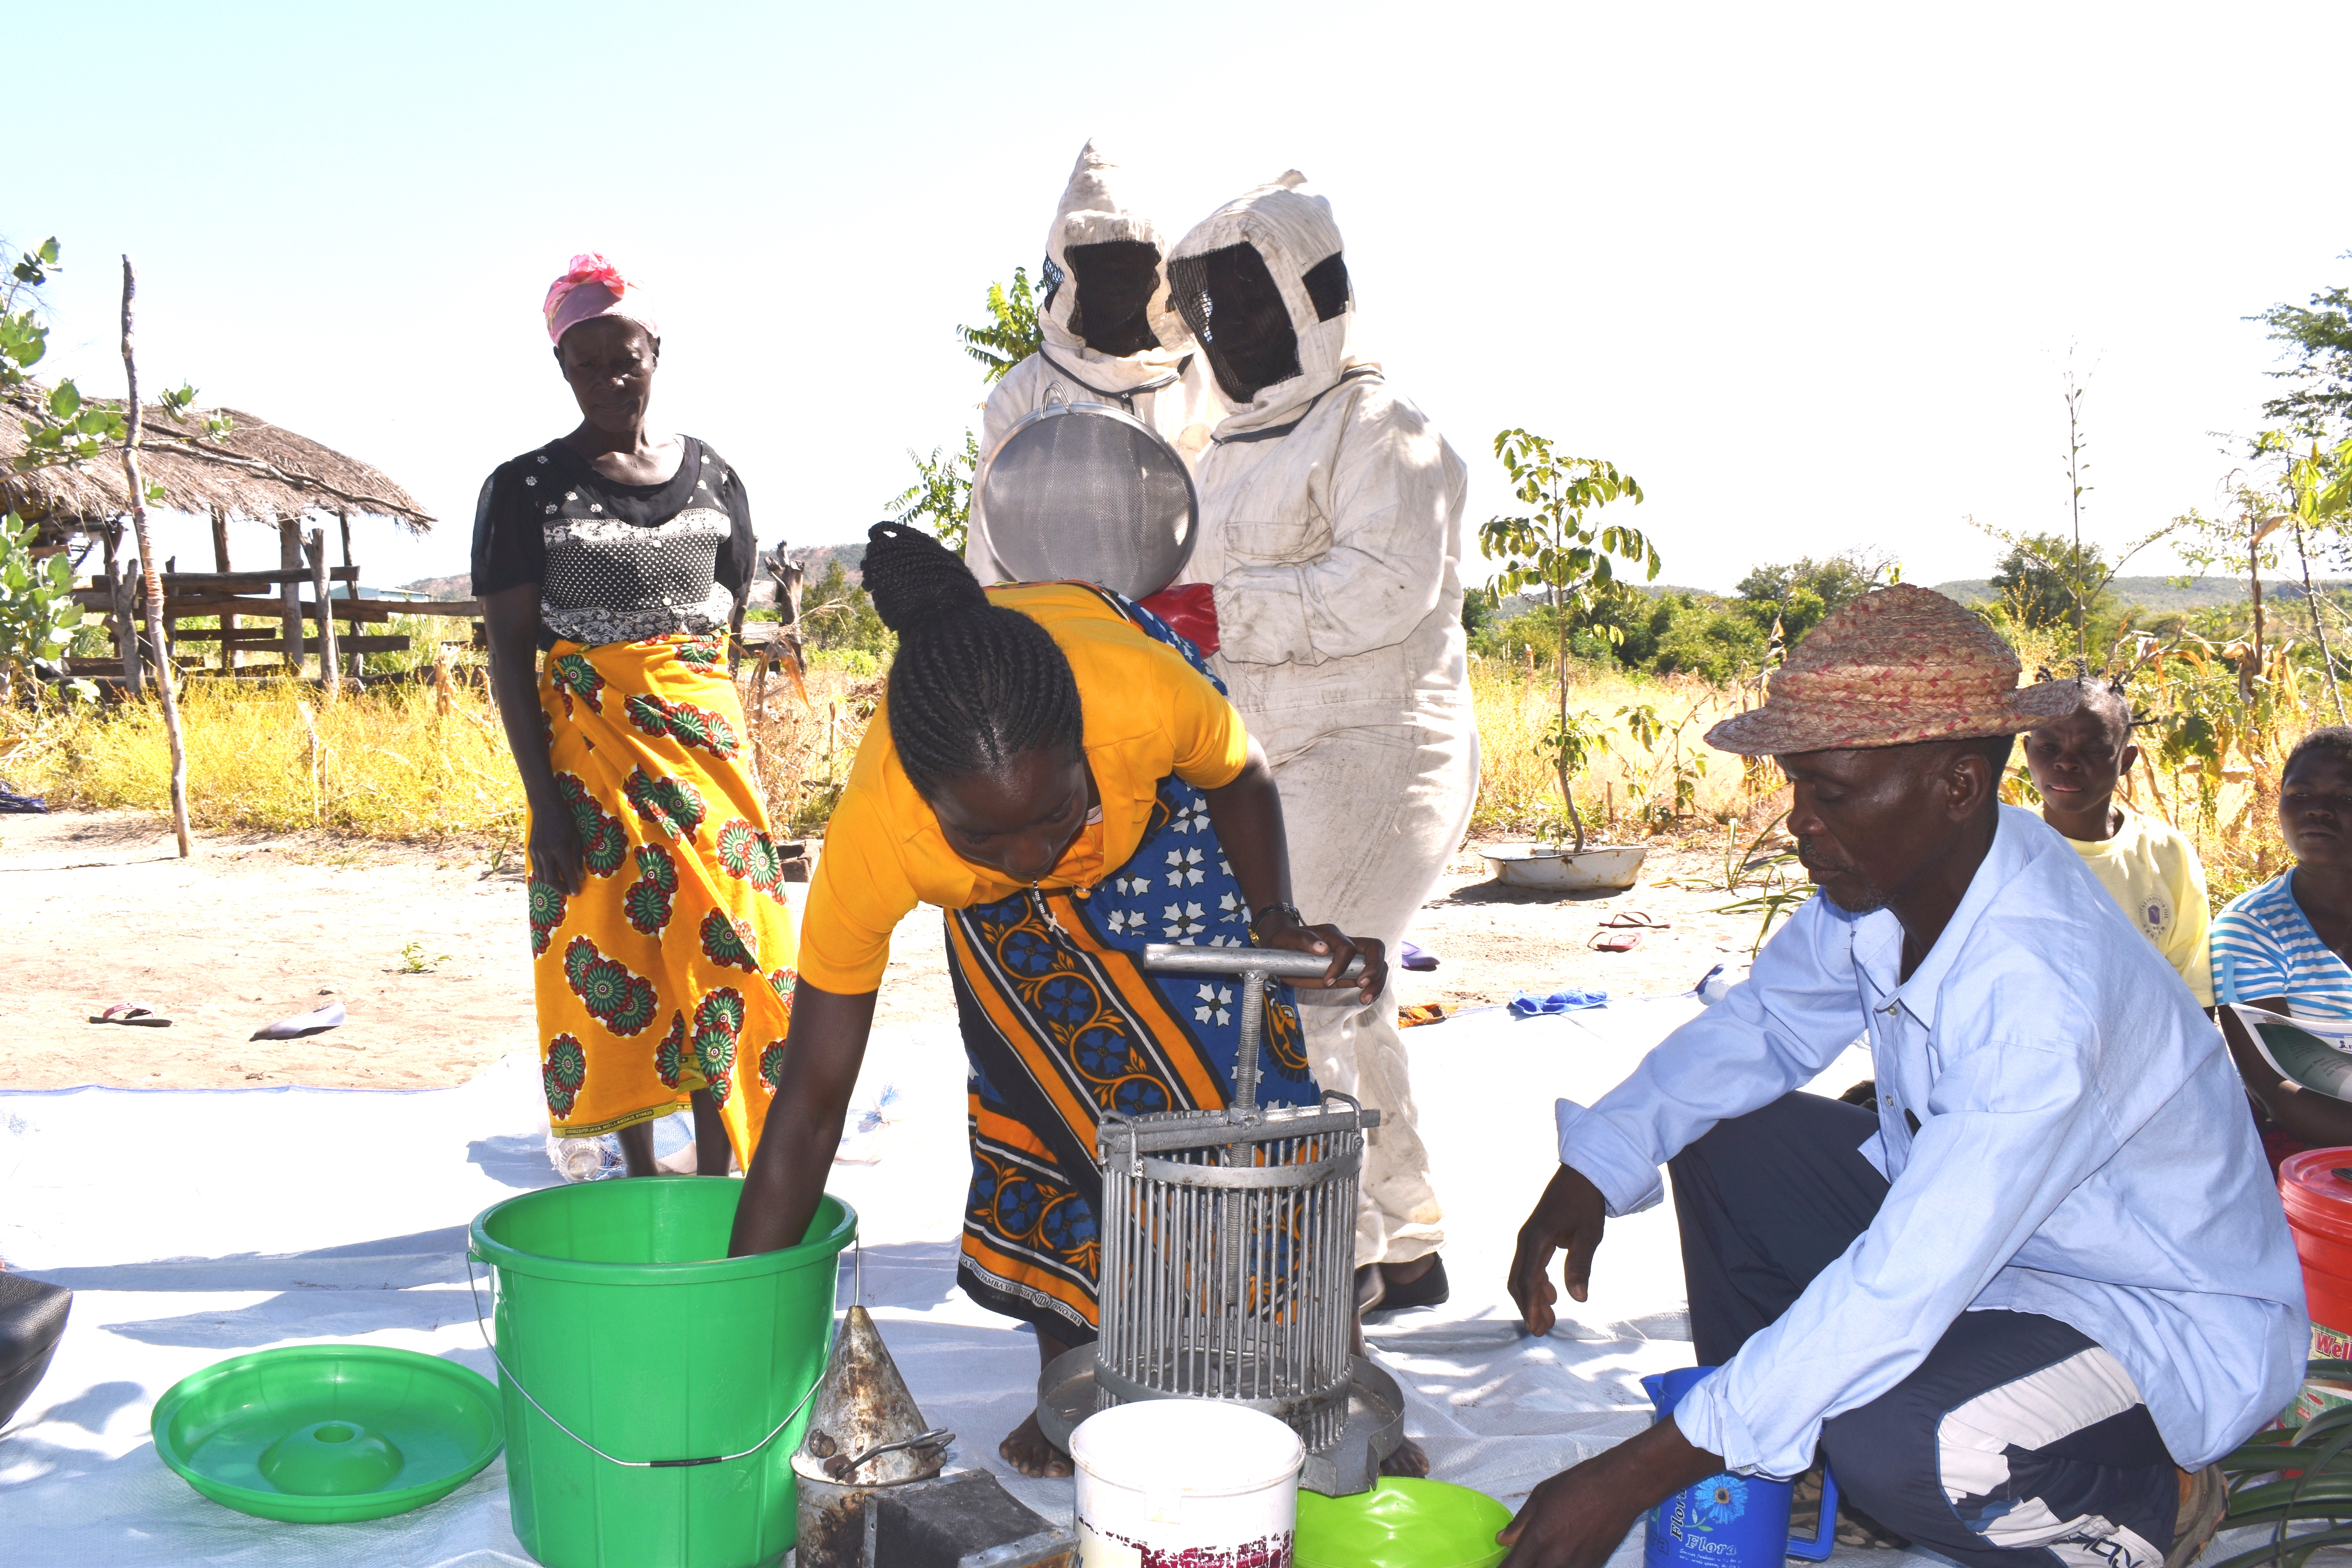 Members of the Dikeni Beekeeping Club learn how to extract honey using a centrifugal honey extractor.